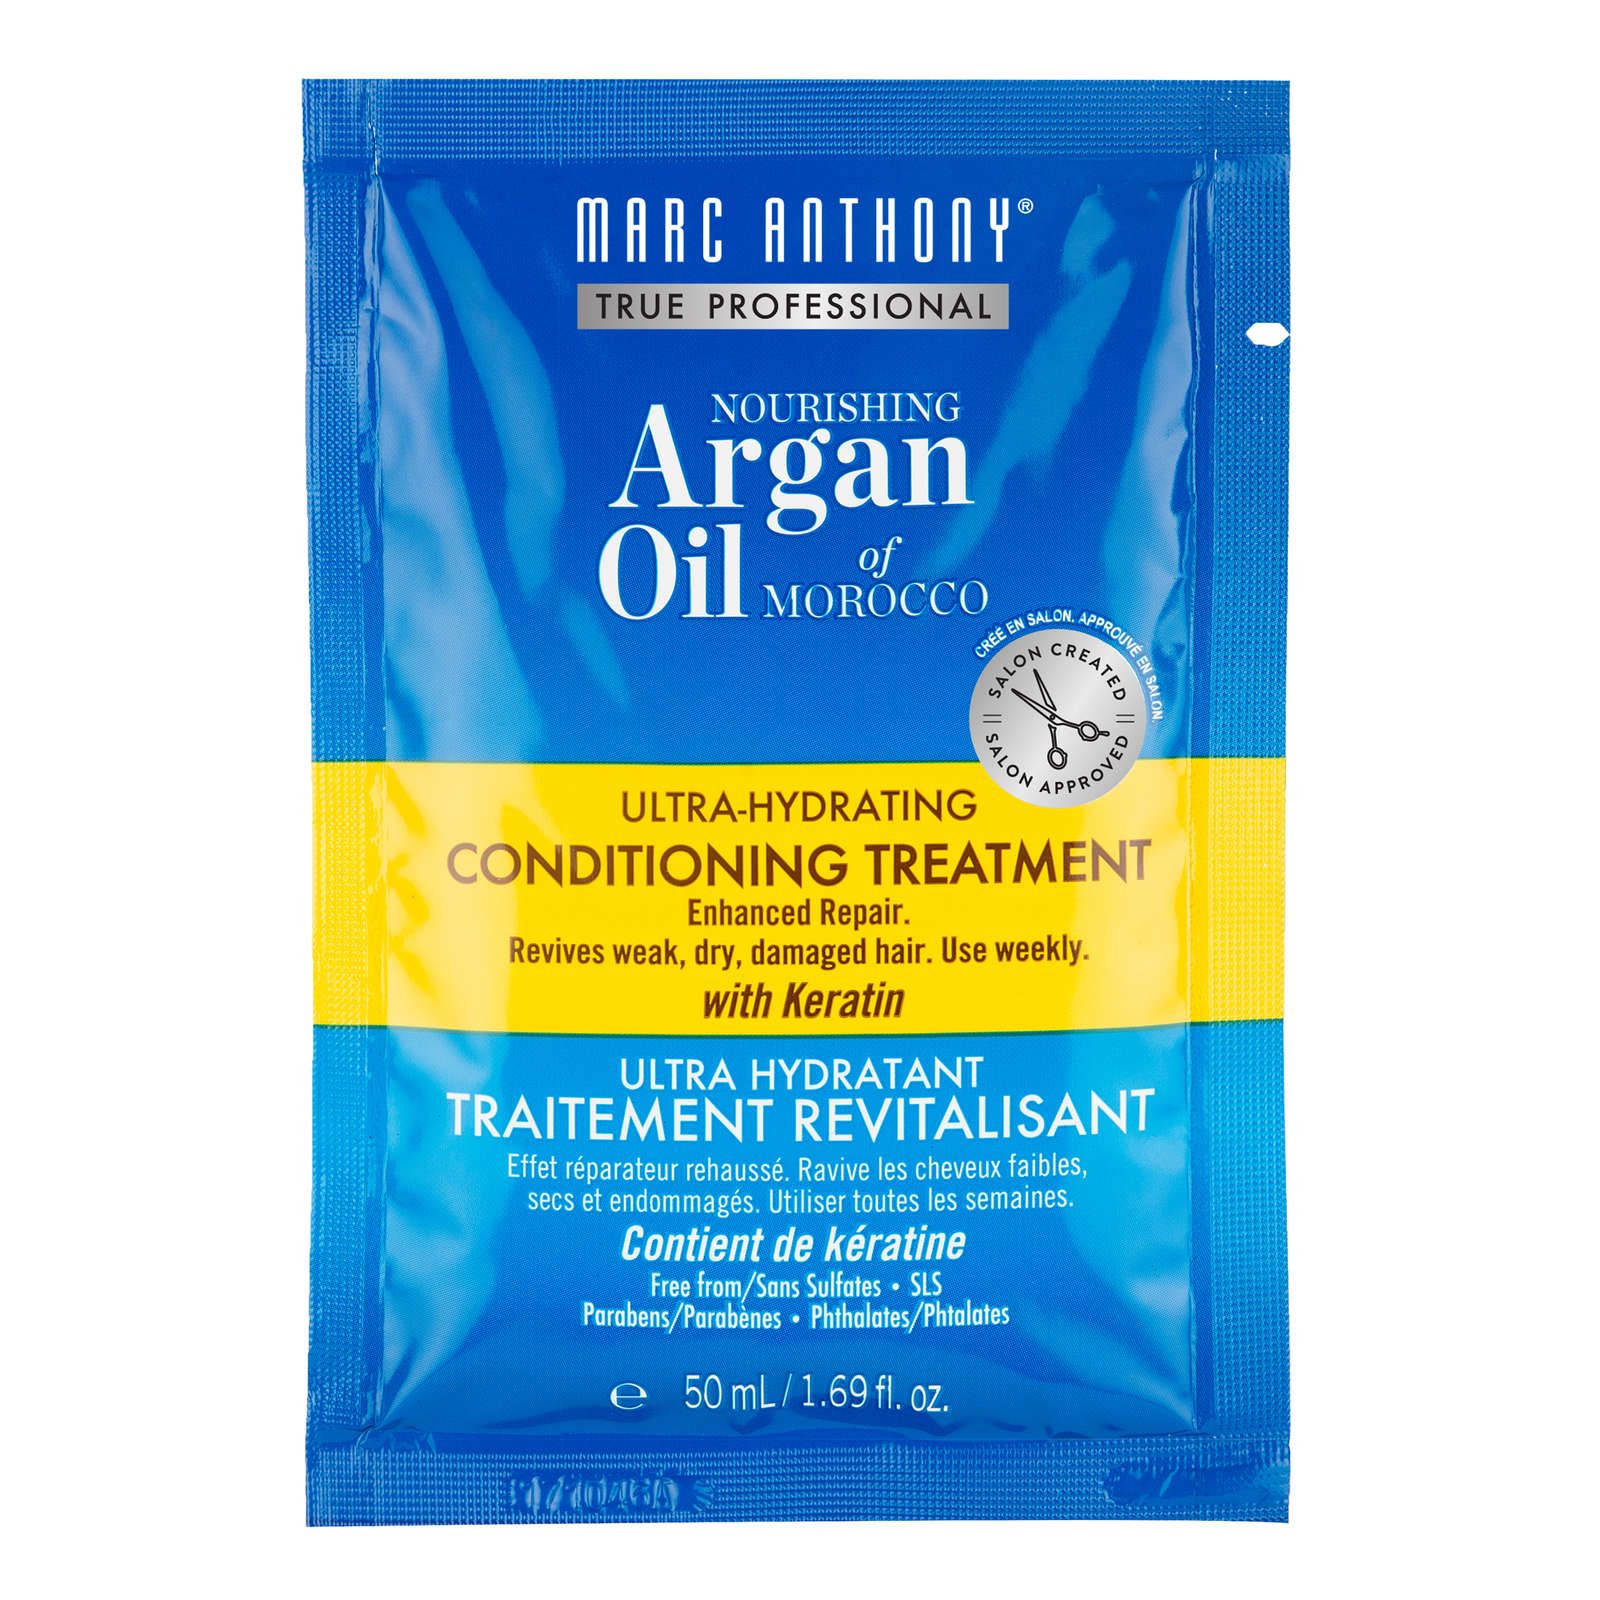 Nourishing Argan Oil of Morocco  Conditioning Treatment | Shoppers Drug Mart – Beauty